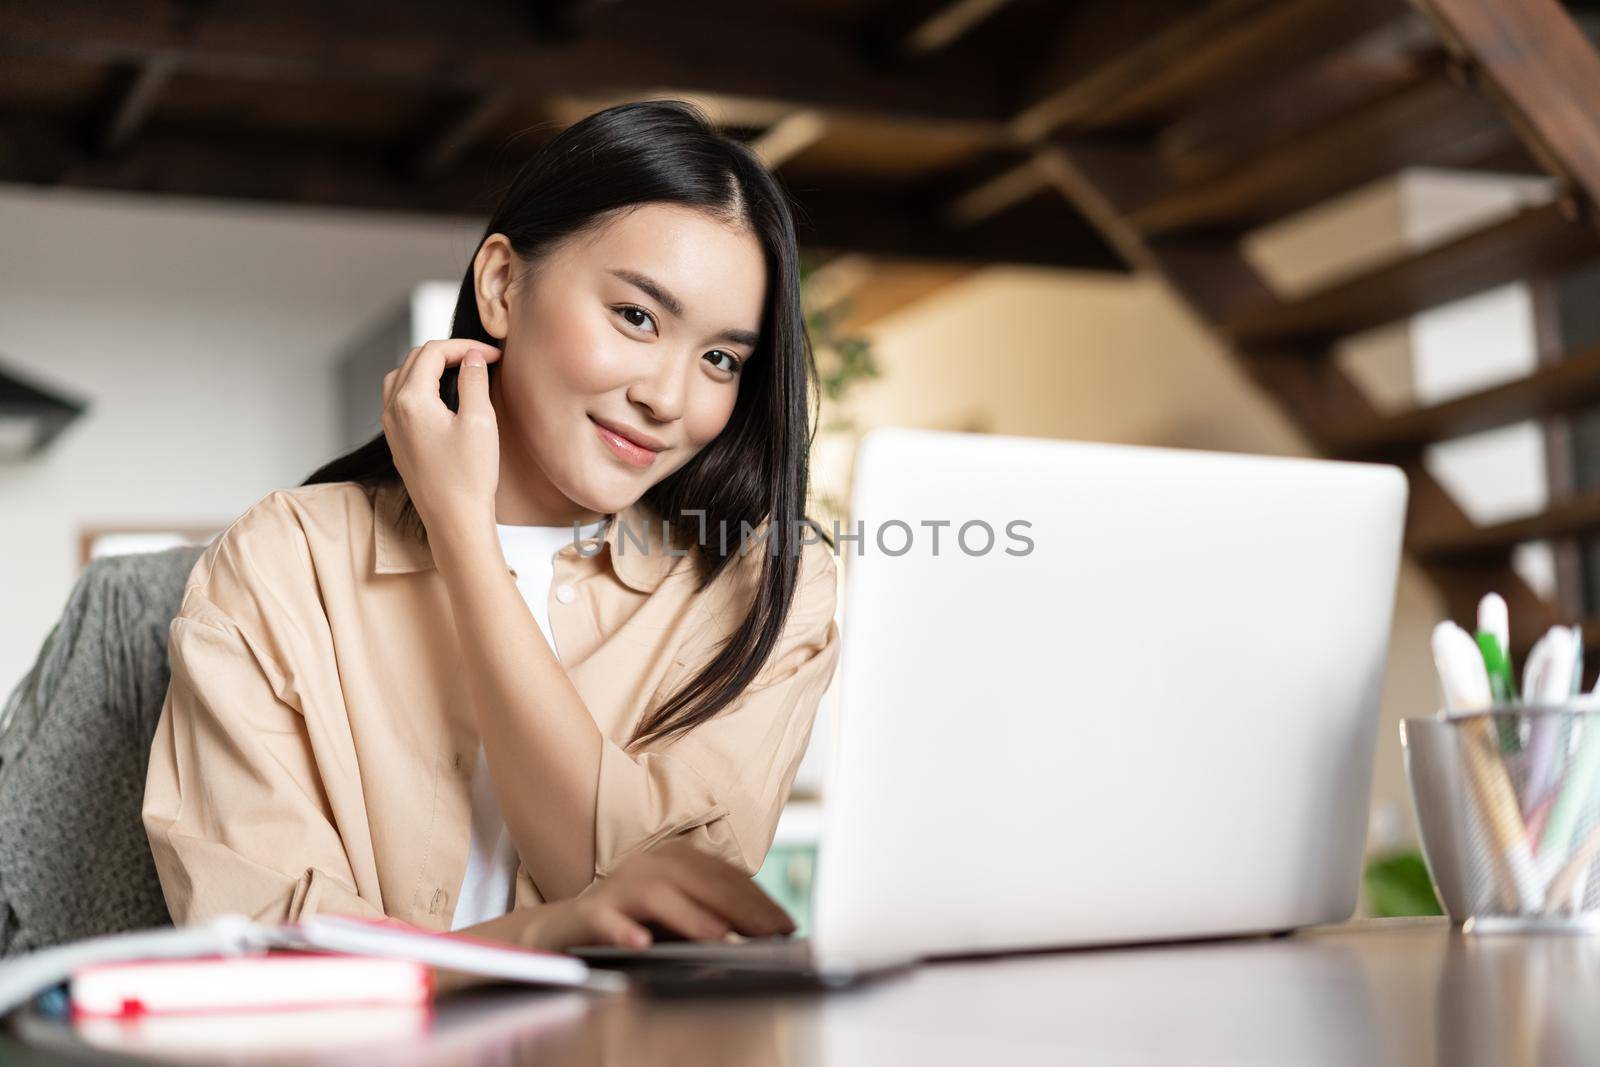 Work from home. Asian girl using laptop computer and smiling, studying at online school.